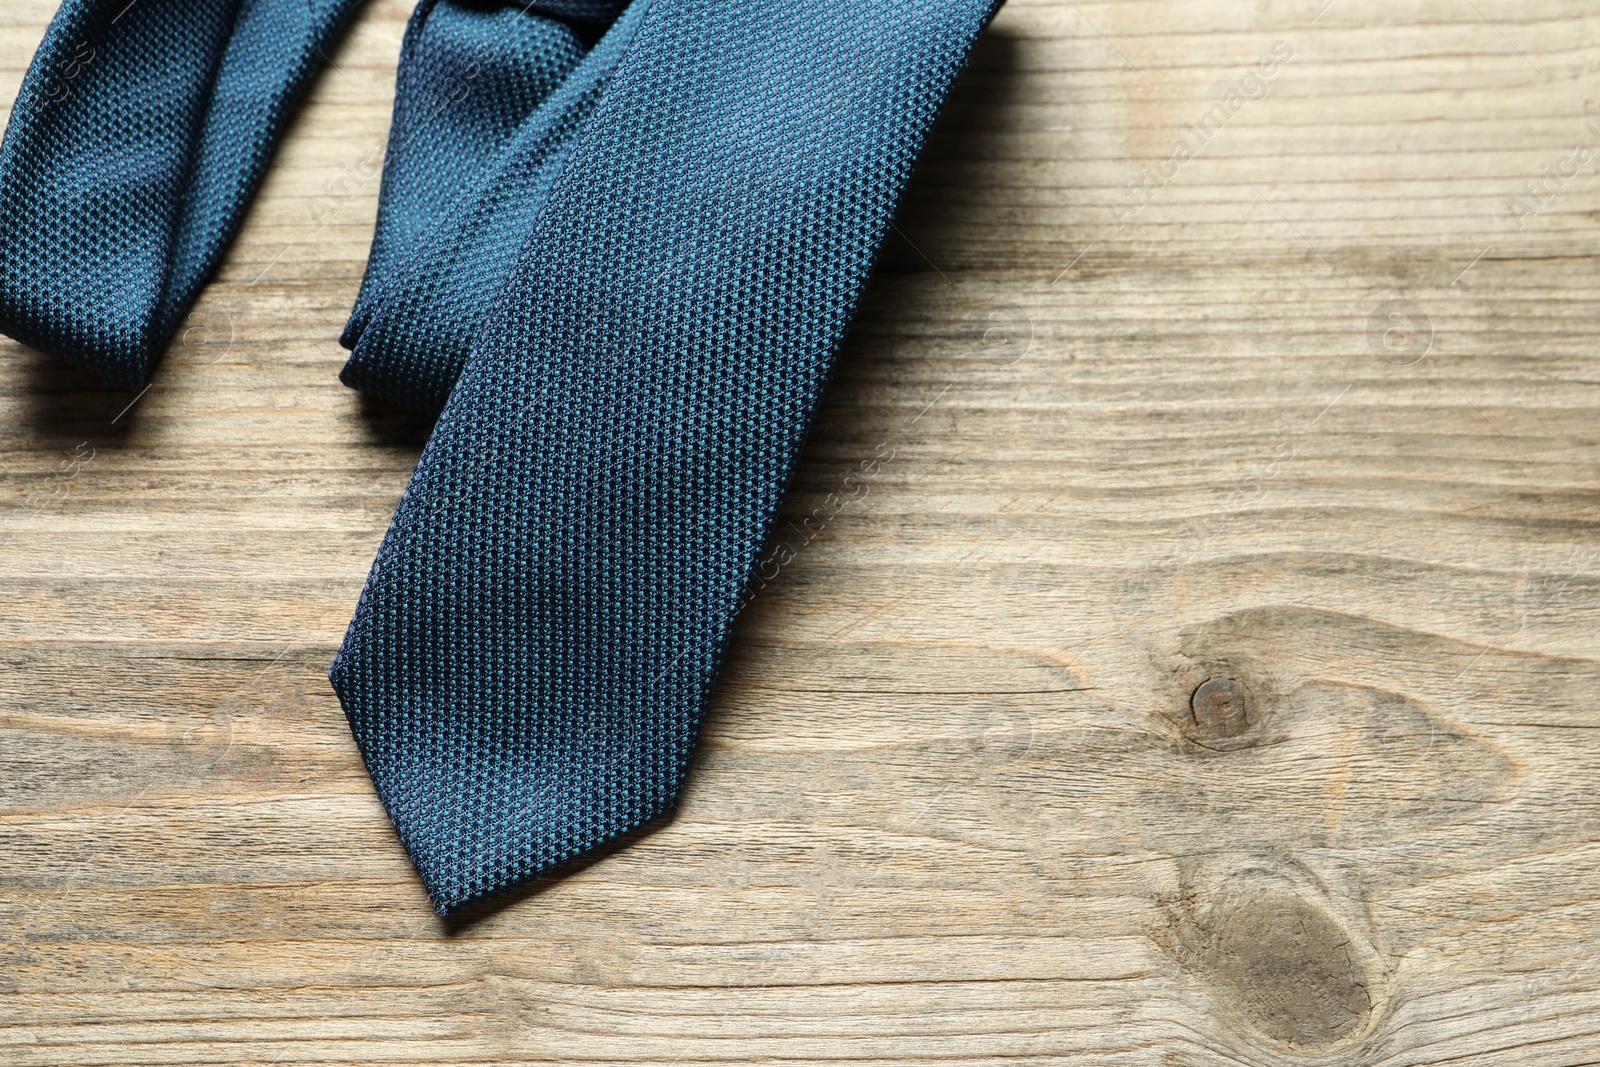 Photo of One blue necktie on light wooden table, top view. Space for text